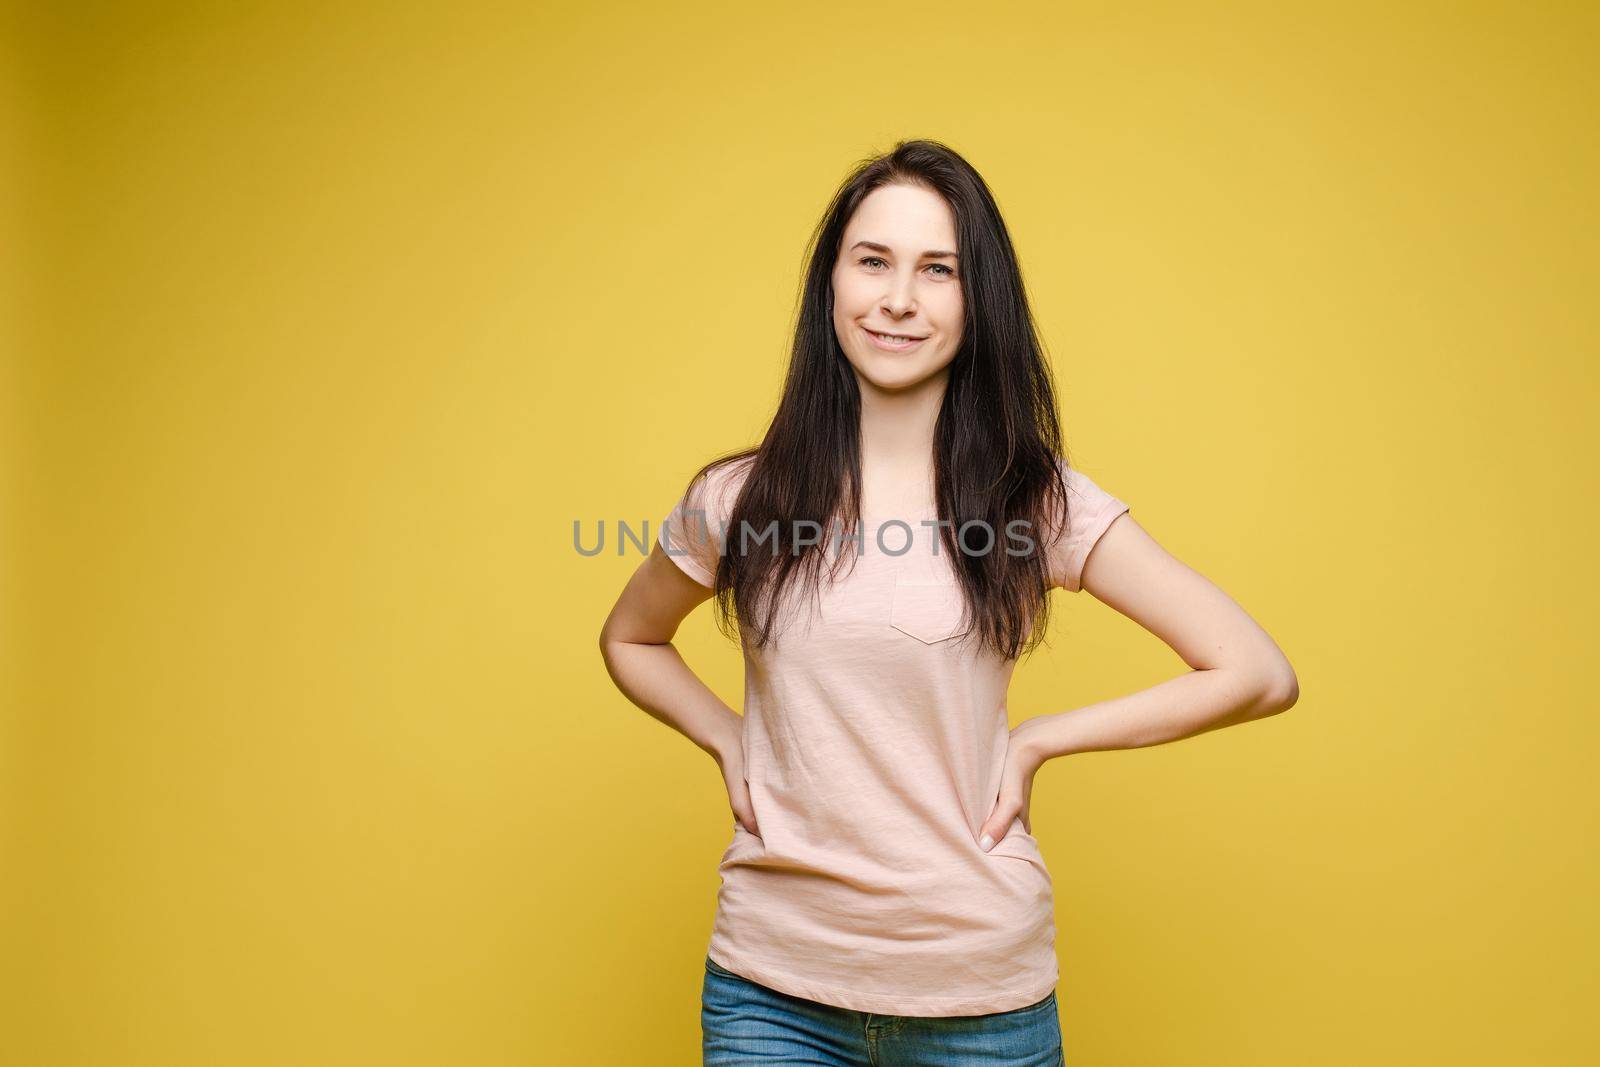 View from front of beautiful slim woman wearing white shirt and jeans standing steady on frey isolated background. Young blonde looking at camera, smiling and posing in studio.